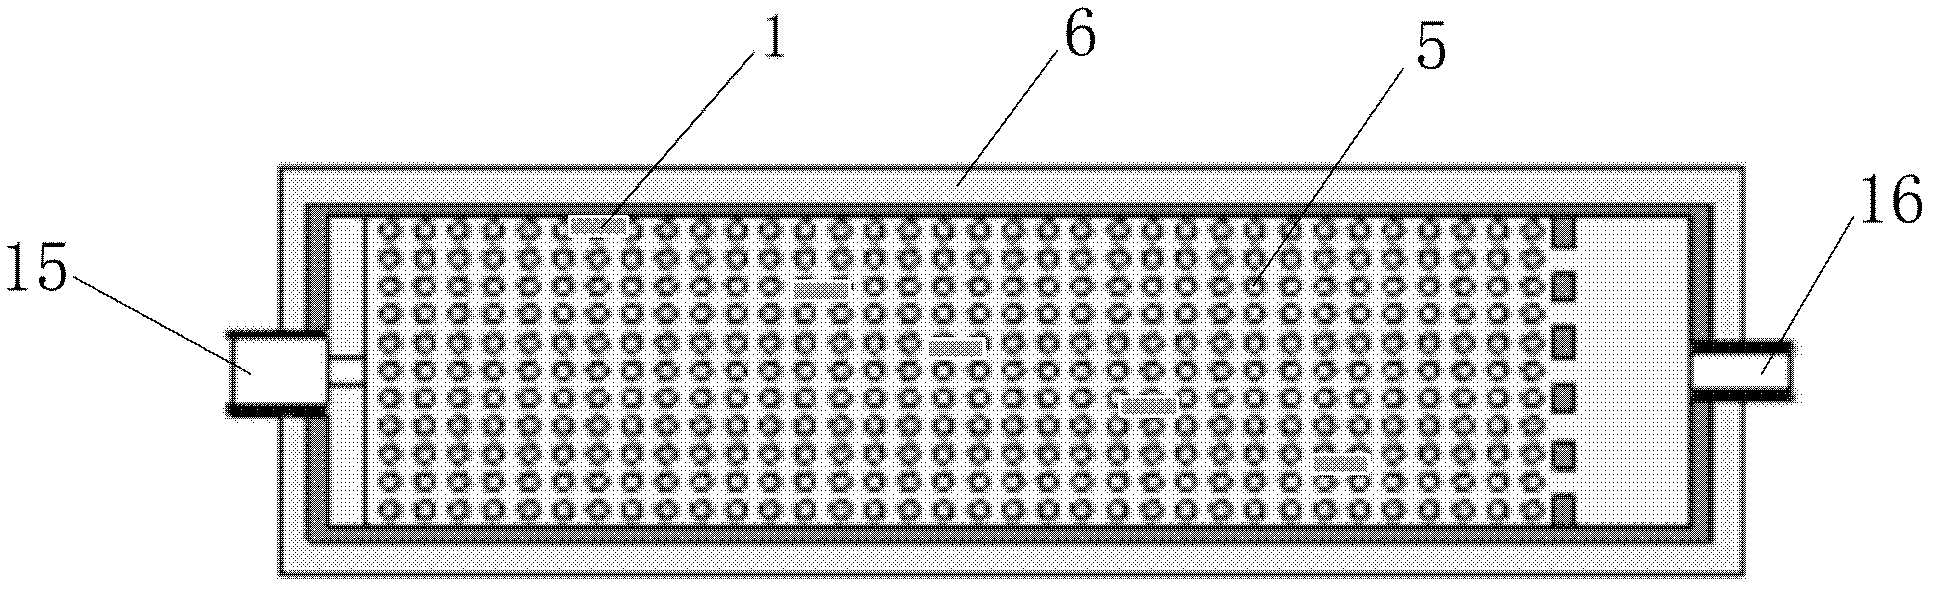 Artificial well wall sand control simulation test device and test method